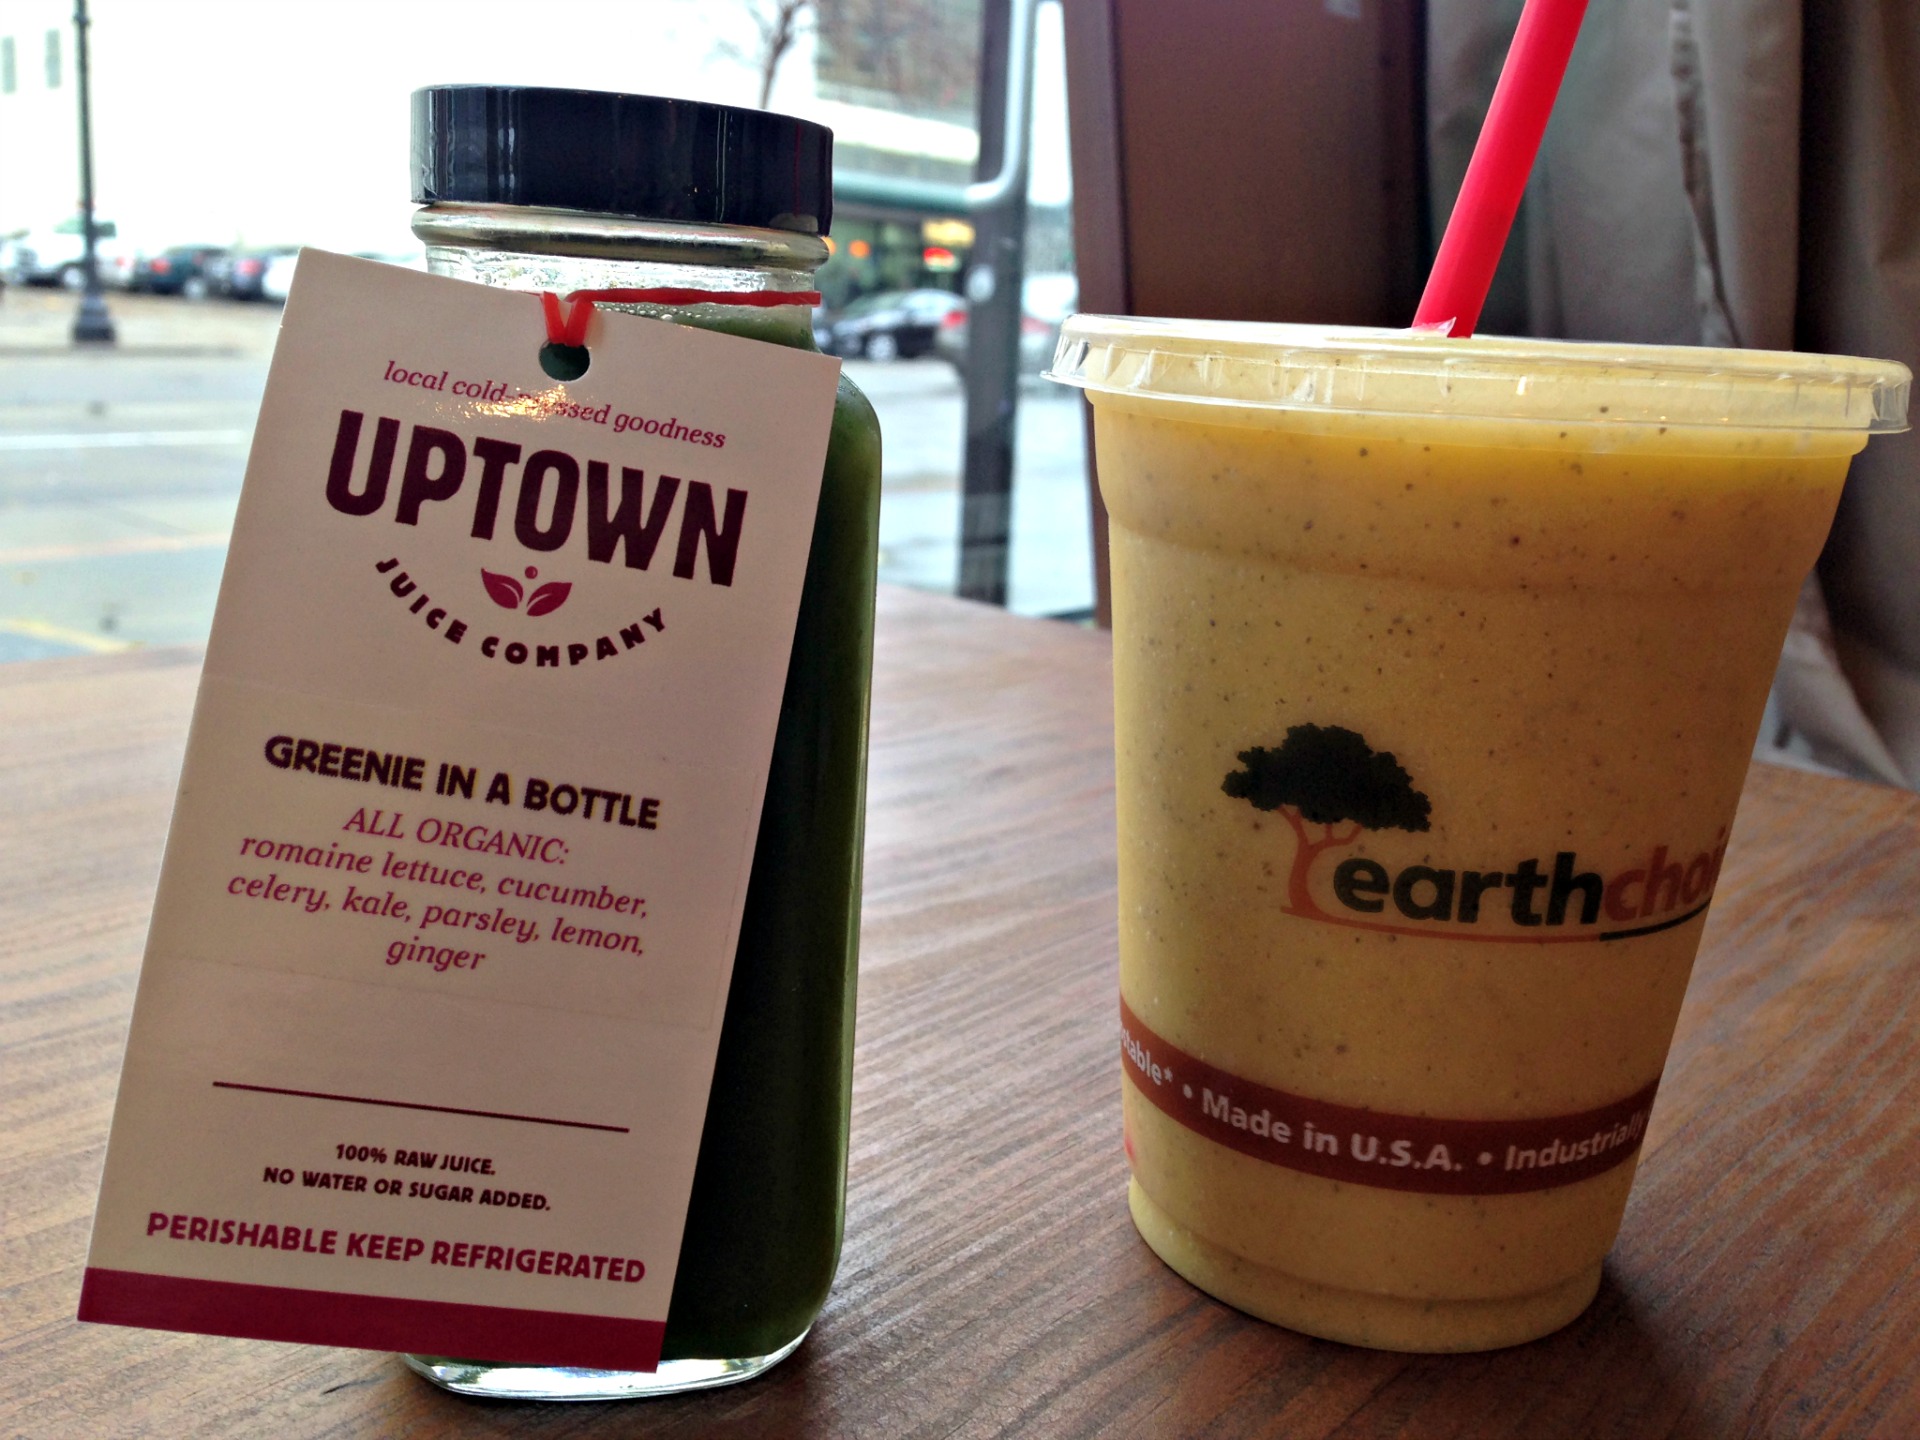 A Greenie In A Bottle juice and turmeric smoothie from Uptown Juice Company in Oakland